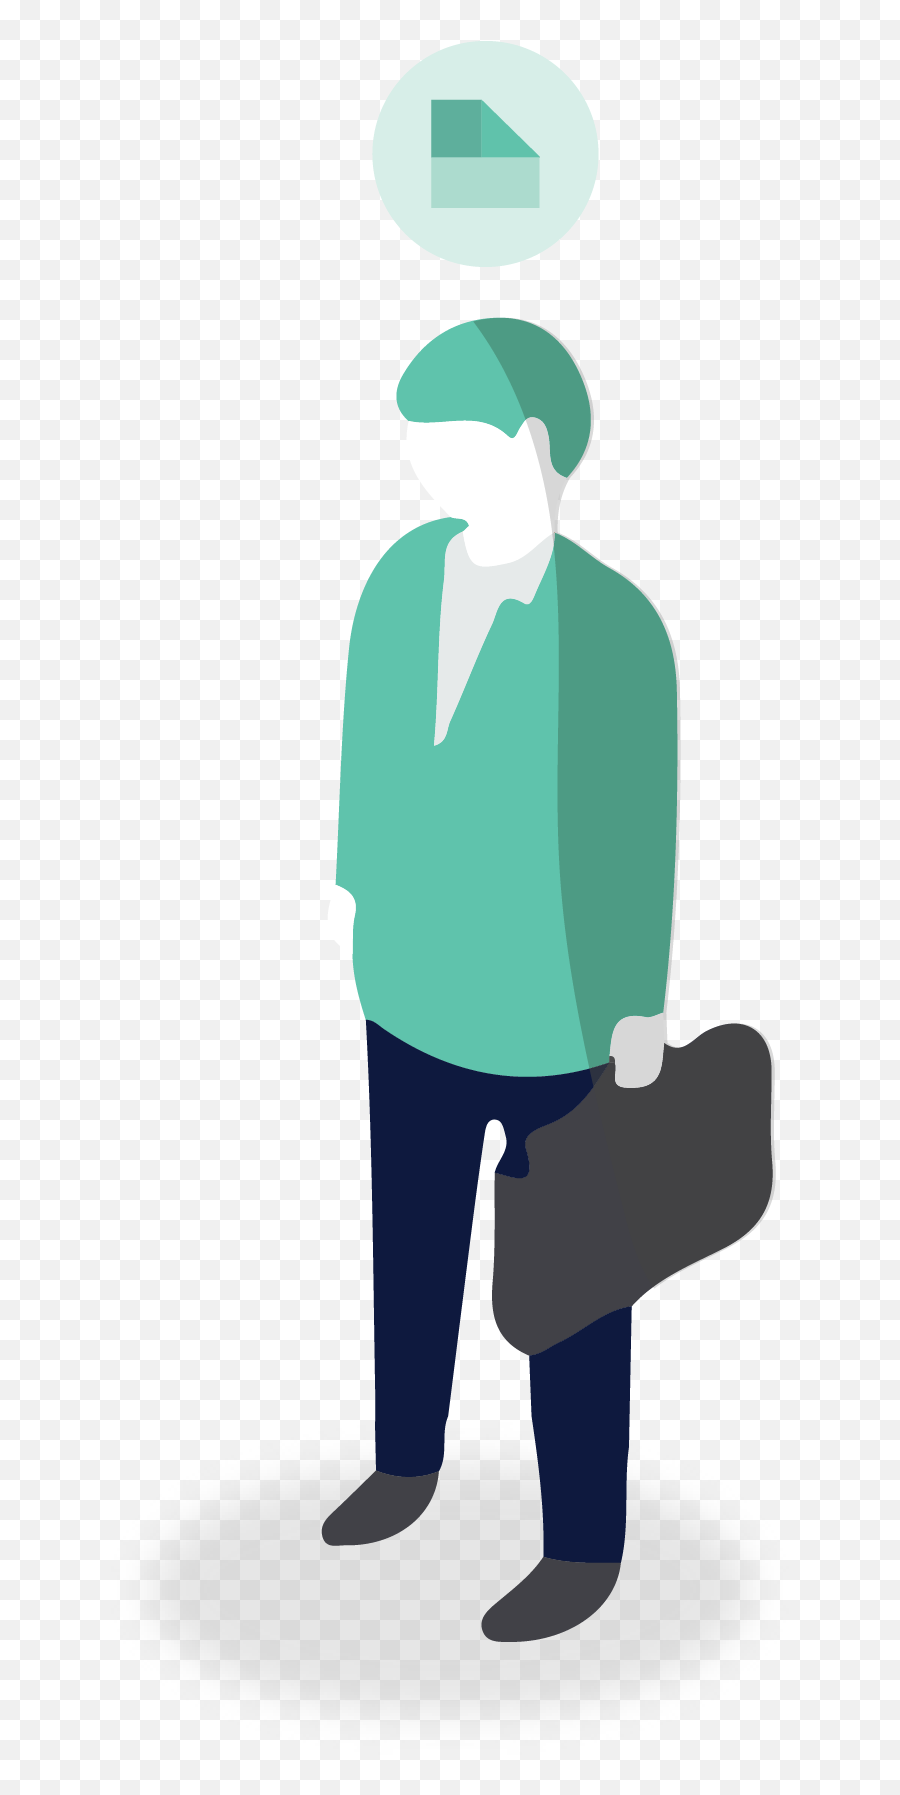 People Like You Are Part Of Grc And Principled Performance - Illustration Png,Man With Briefcase Icon